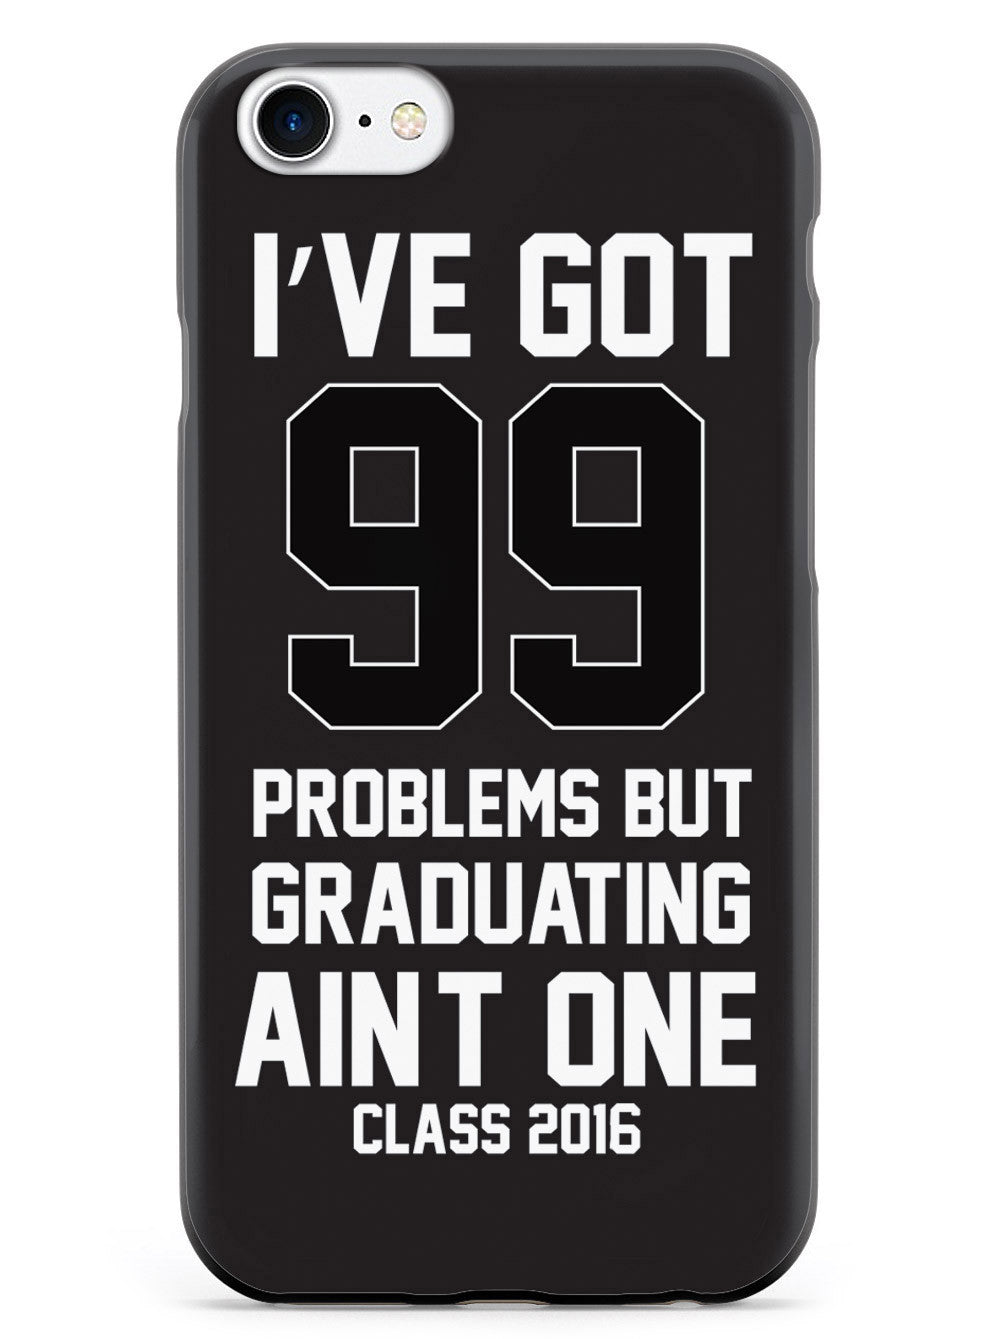 99 Problems - Graduating Ain't One Case